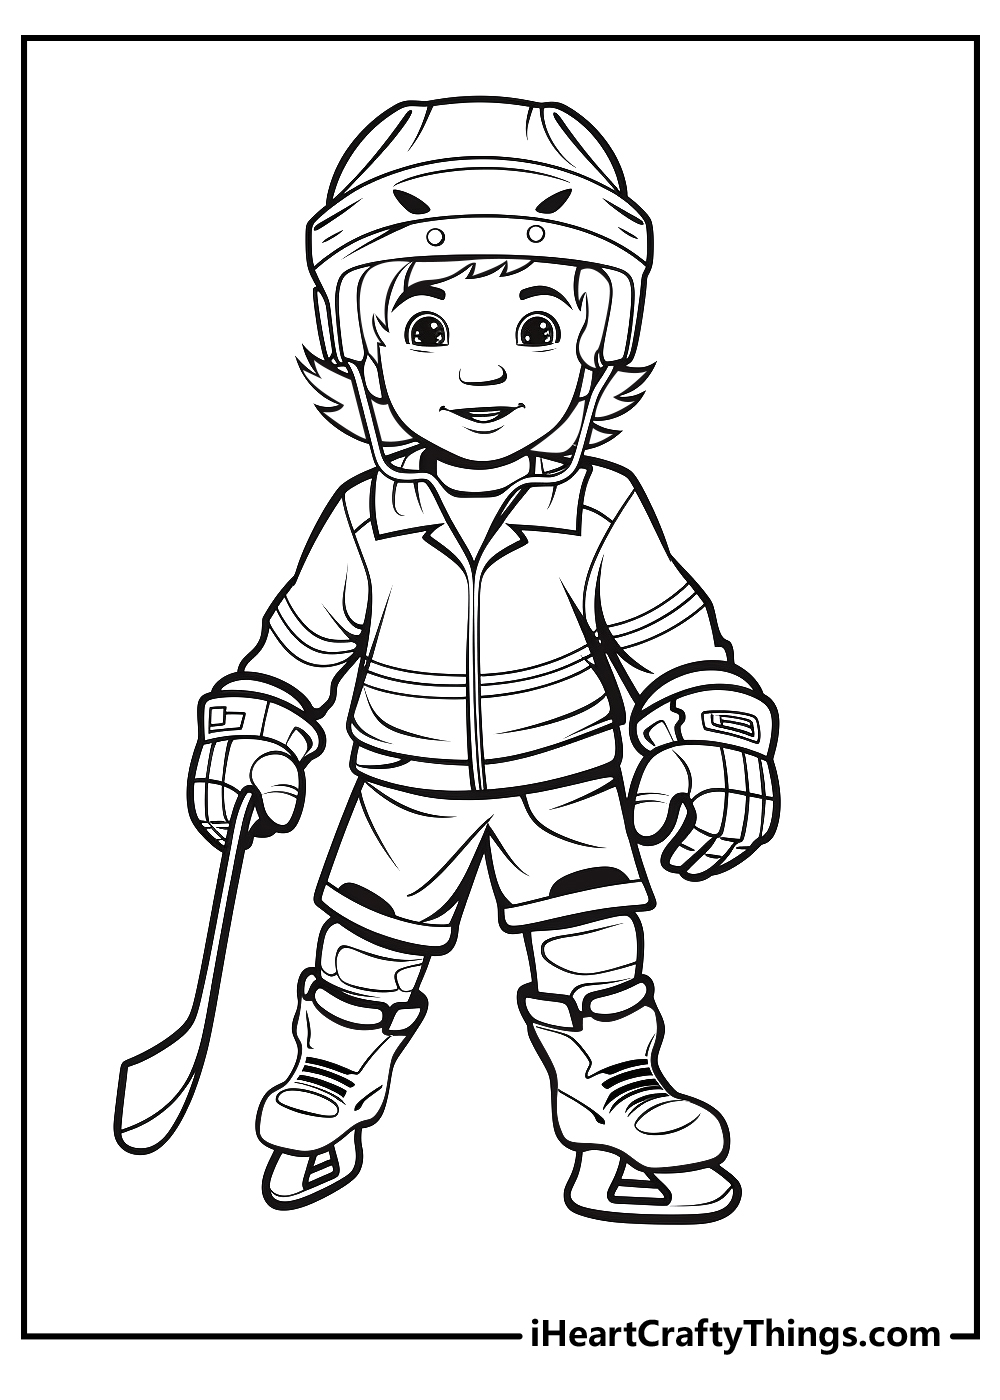 hockey coloring pages for kids